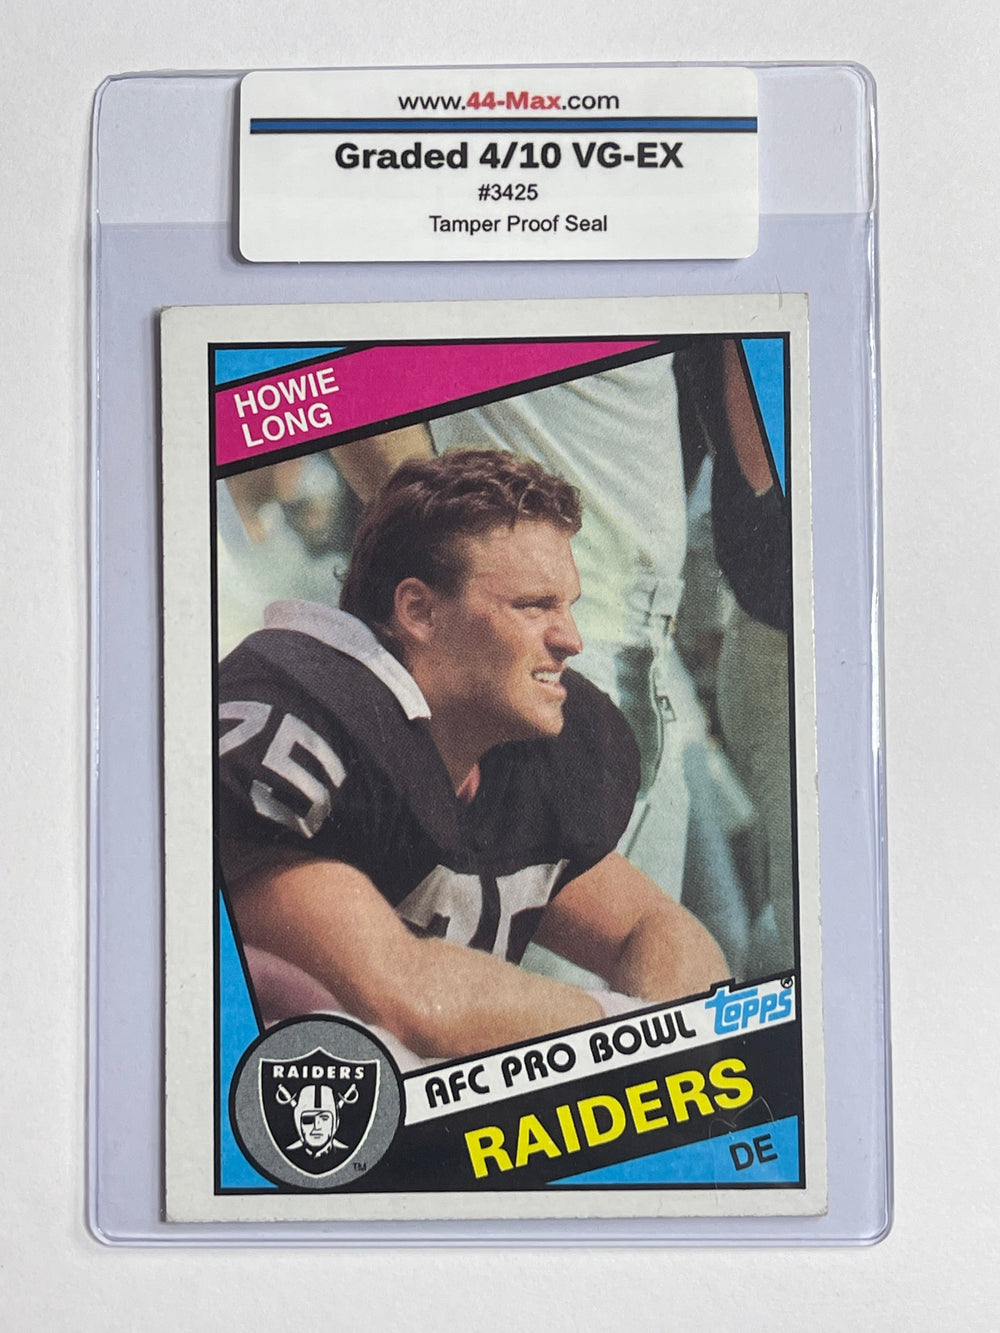 Howie Long 1984 Topps RC Football Card. 44-Max 4/10 VG-EX #3425